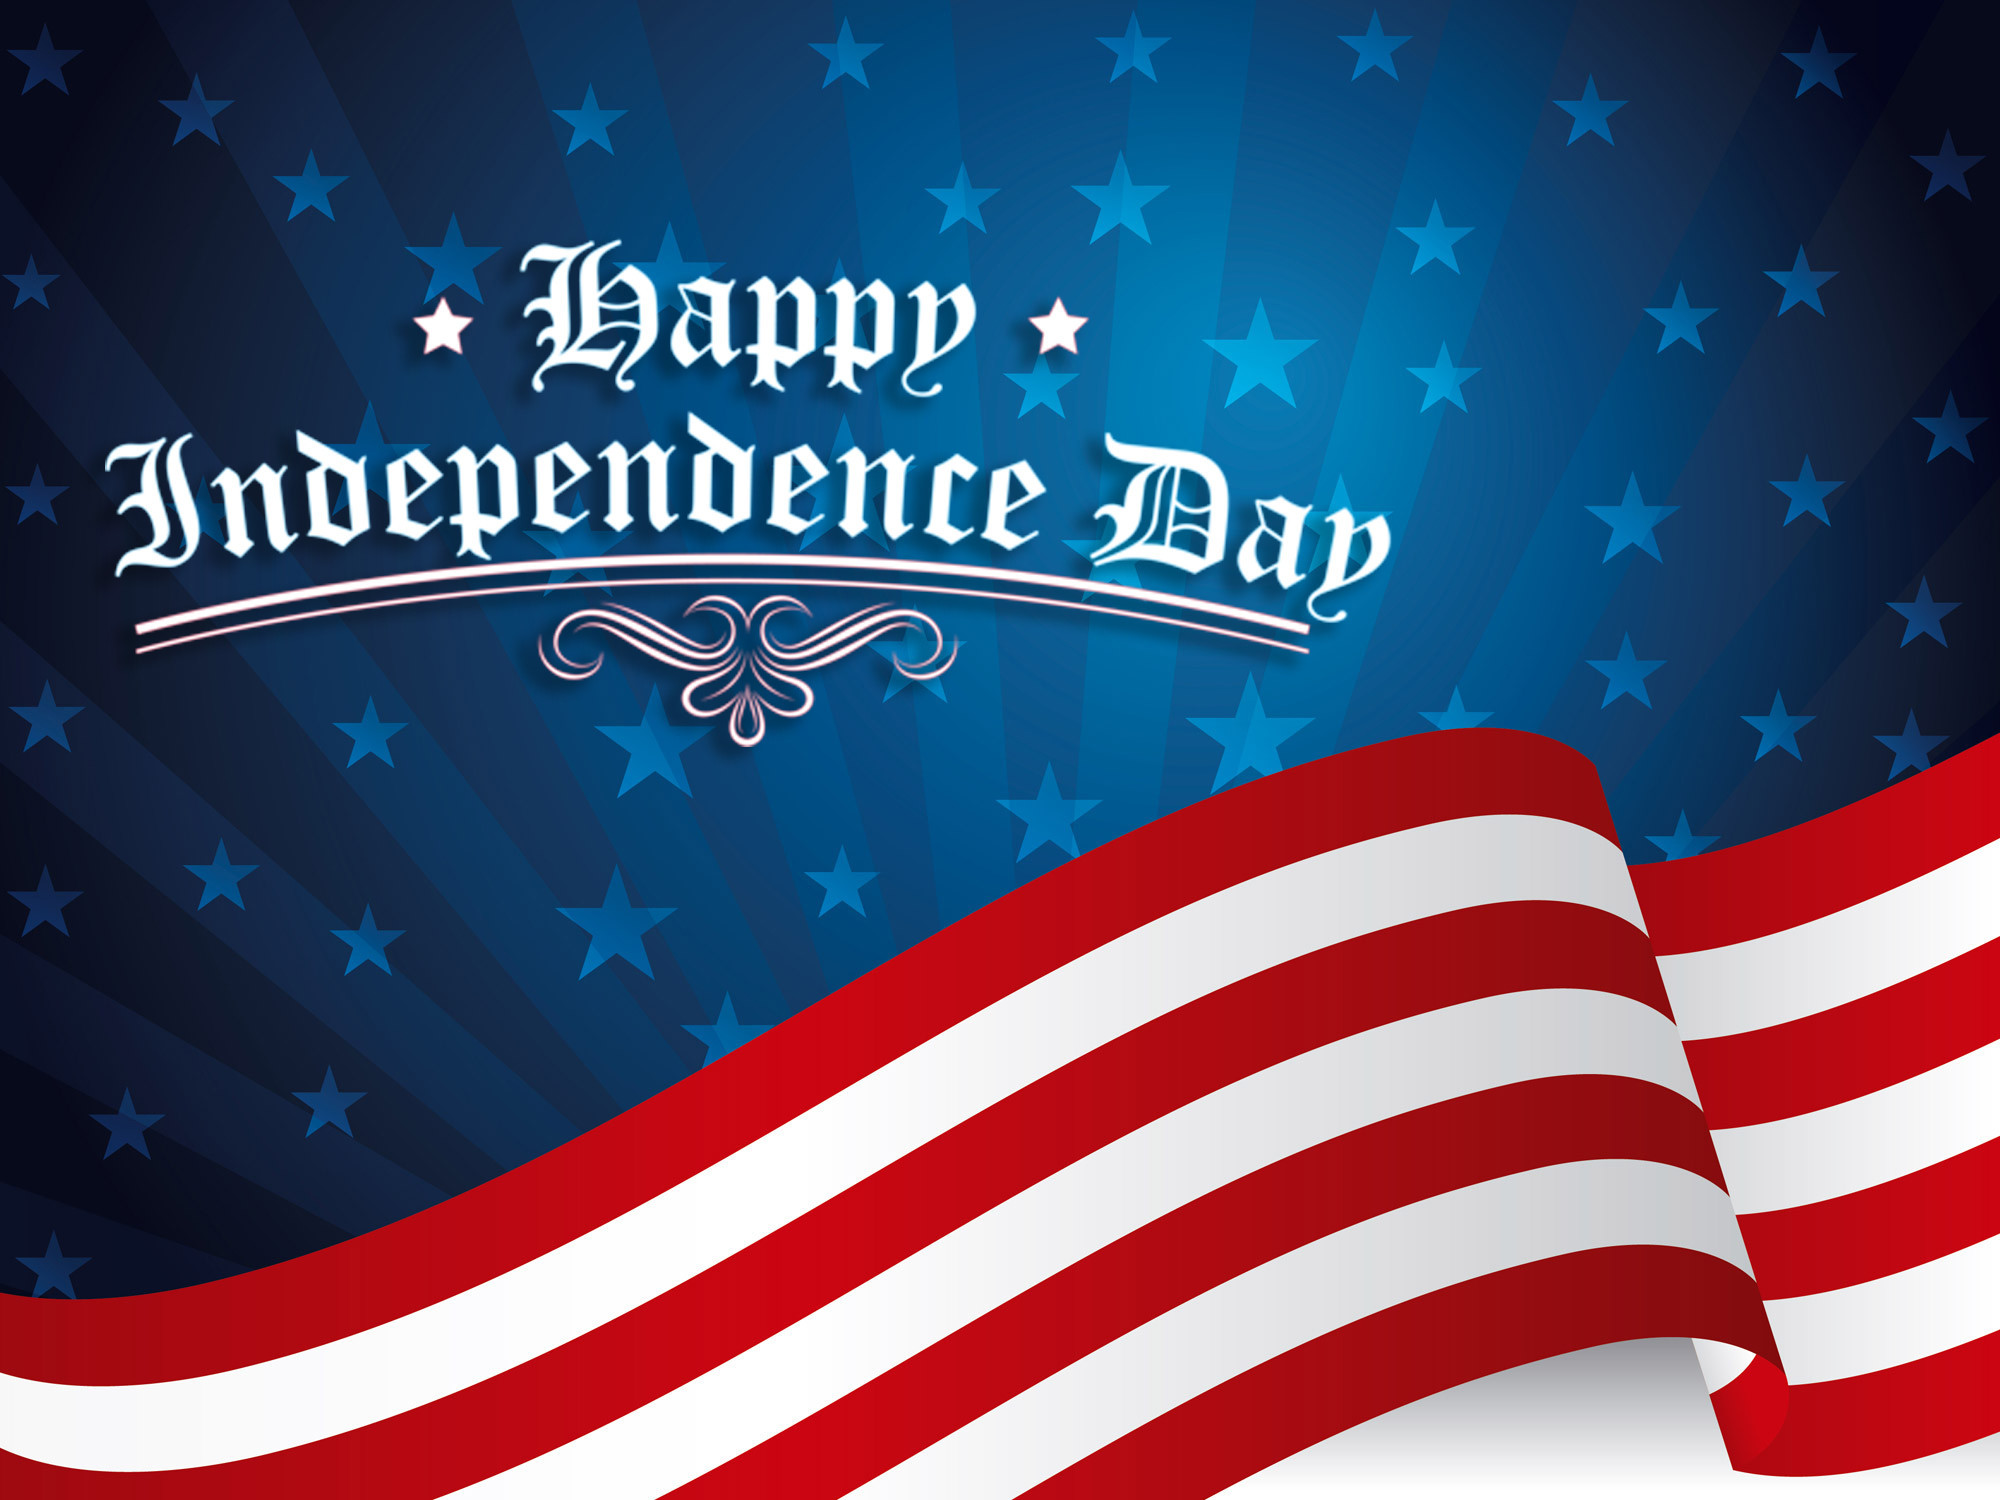 2000x1500  July images The 25 best Independence day wallpaper ideas on  Pinterest | 4th . Download. Happy Memorial ...